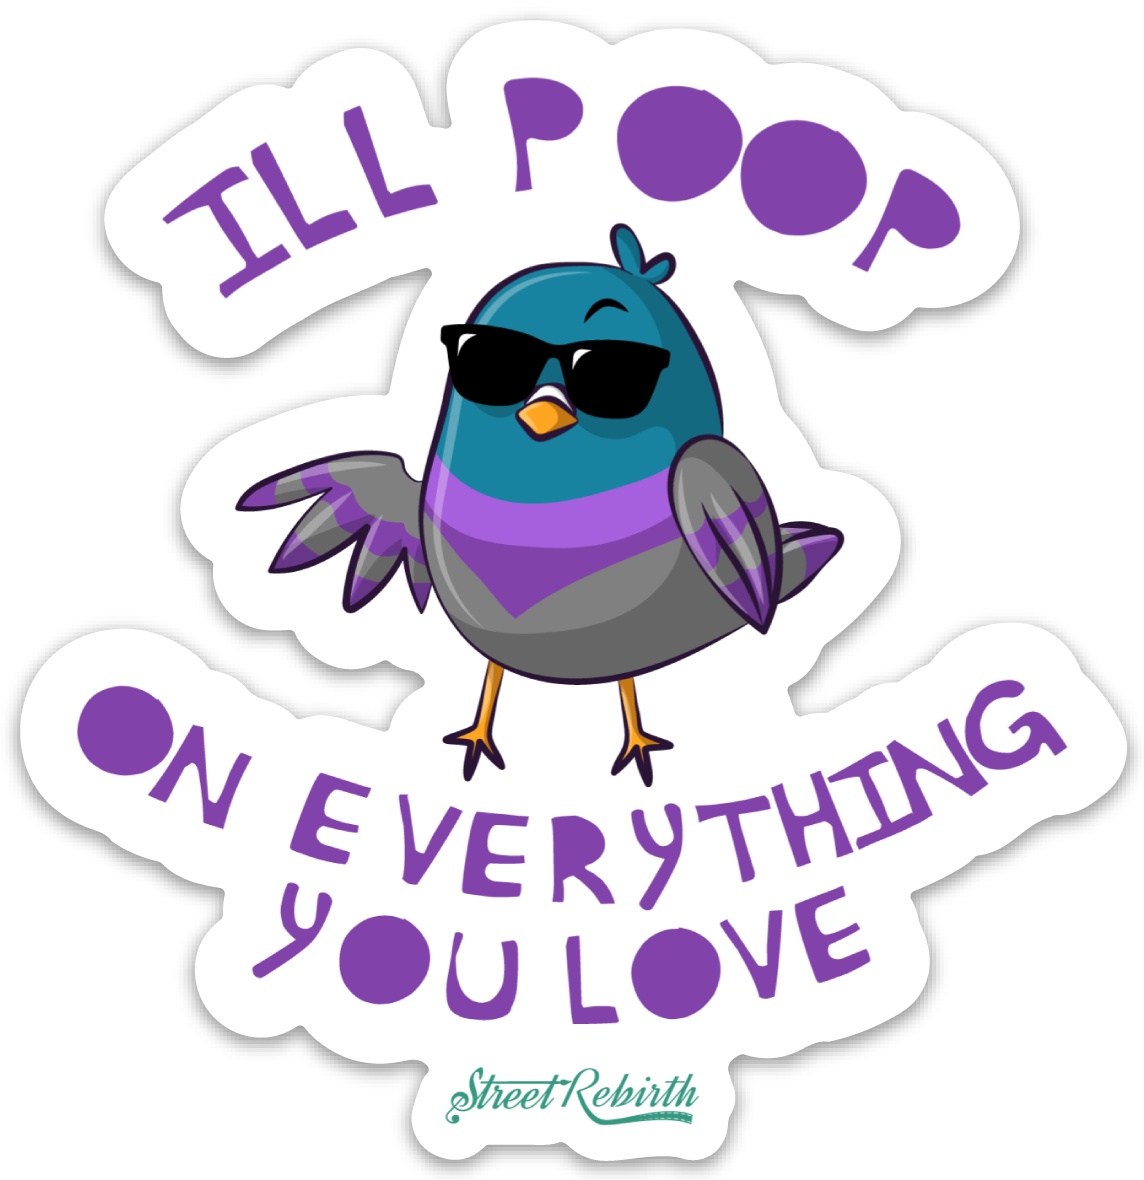 I'll poop on everything you love PUN STICKER – ONE 4 INCH WATER PROOF VINYL STICKER – FOR HYDRO FLASK, SKATEBOARD, LAPTOP, PLANNER, CAR, COLLECTING, GIFTING